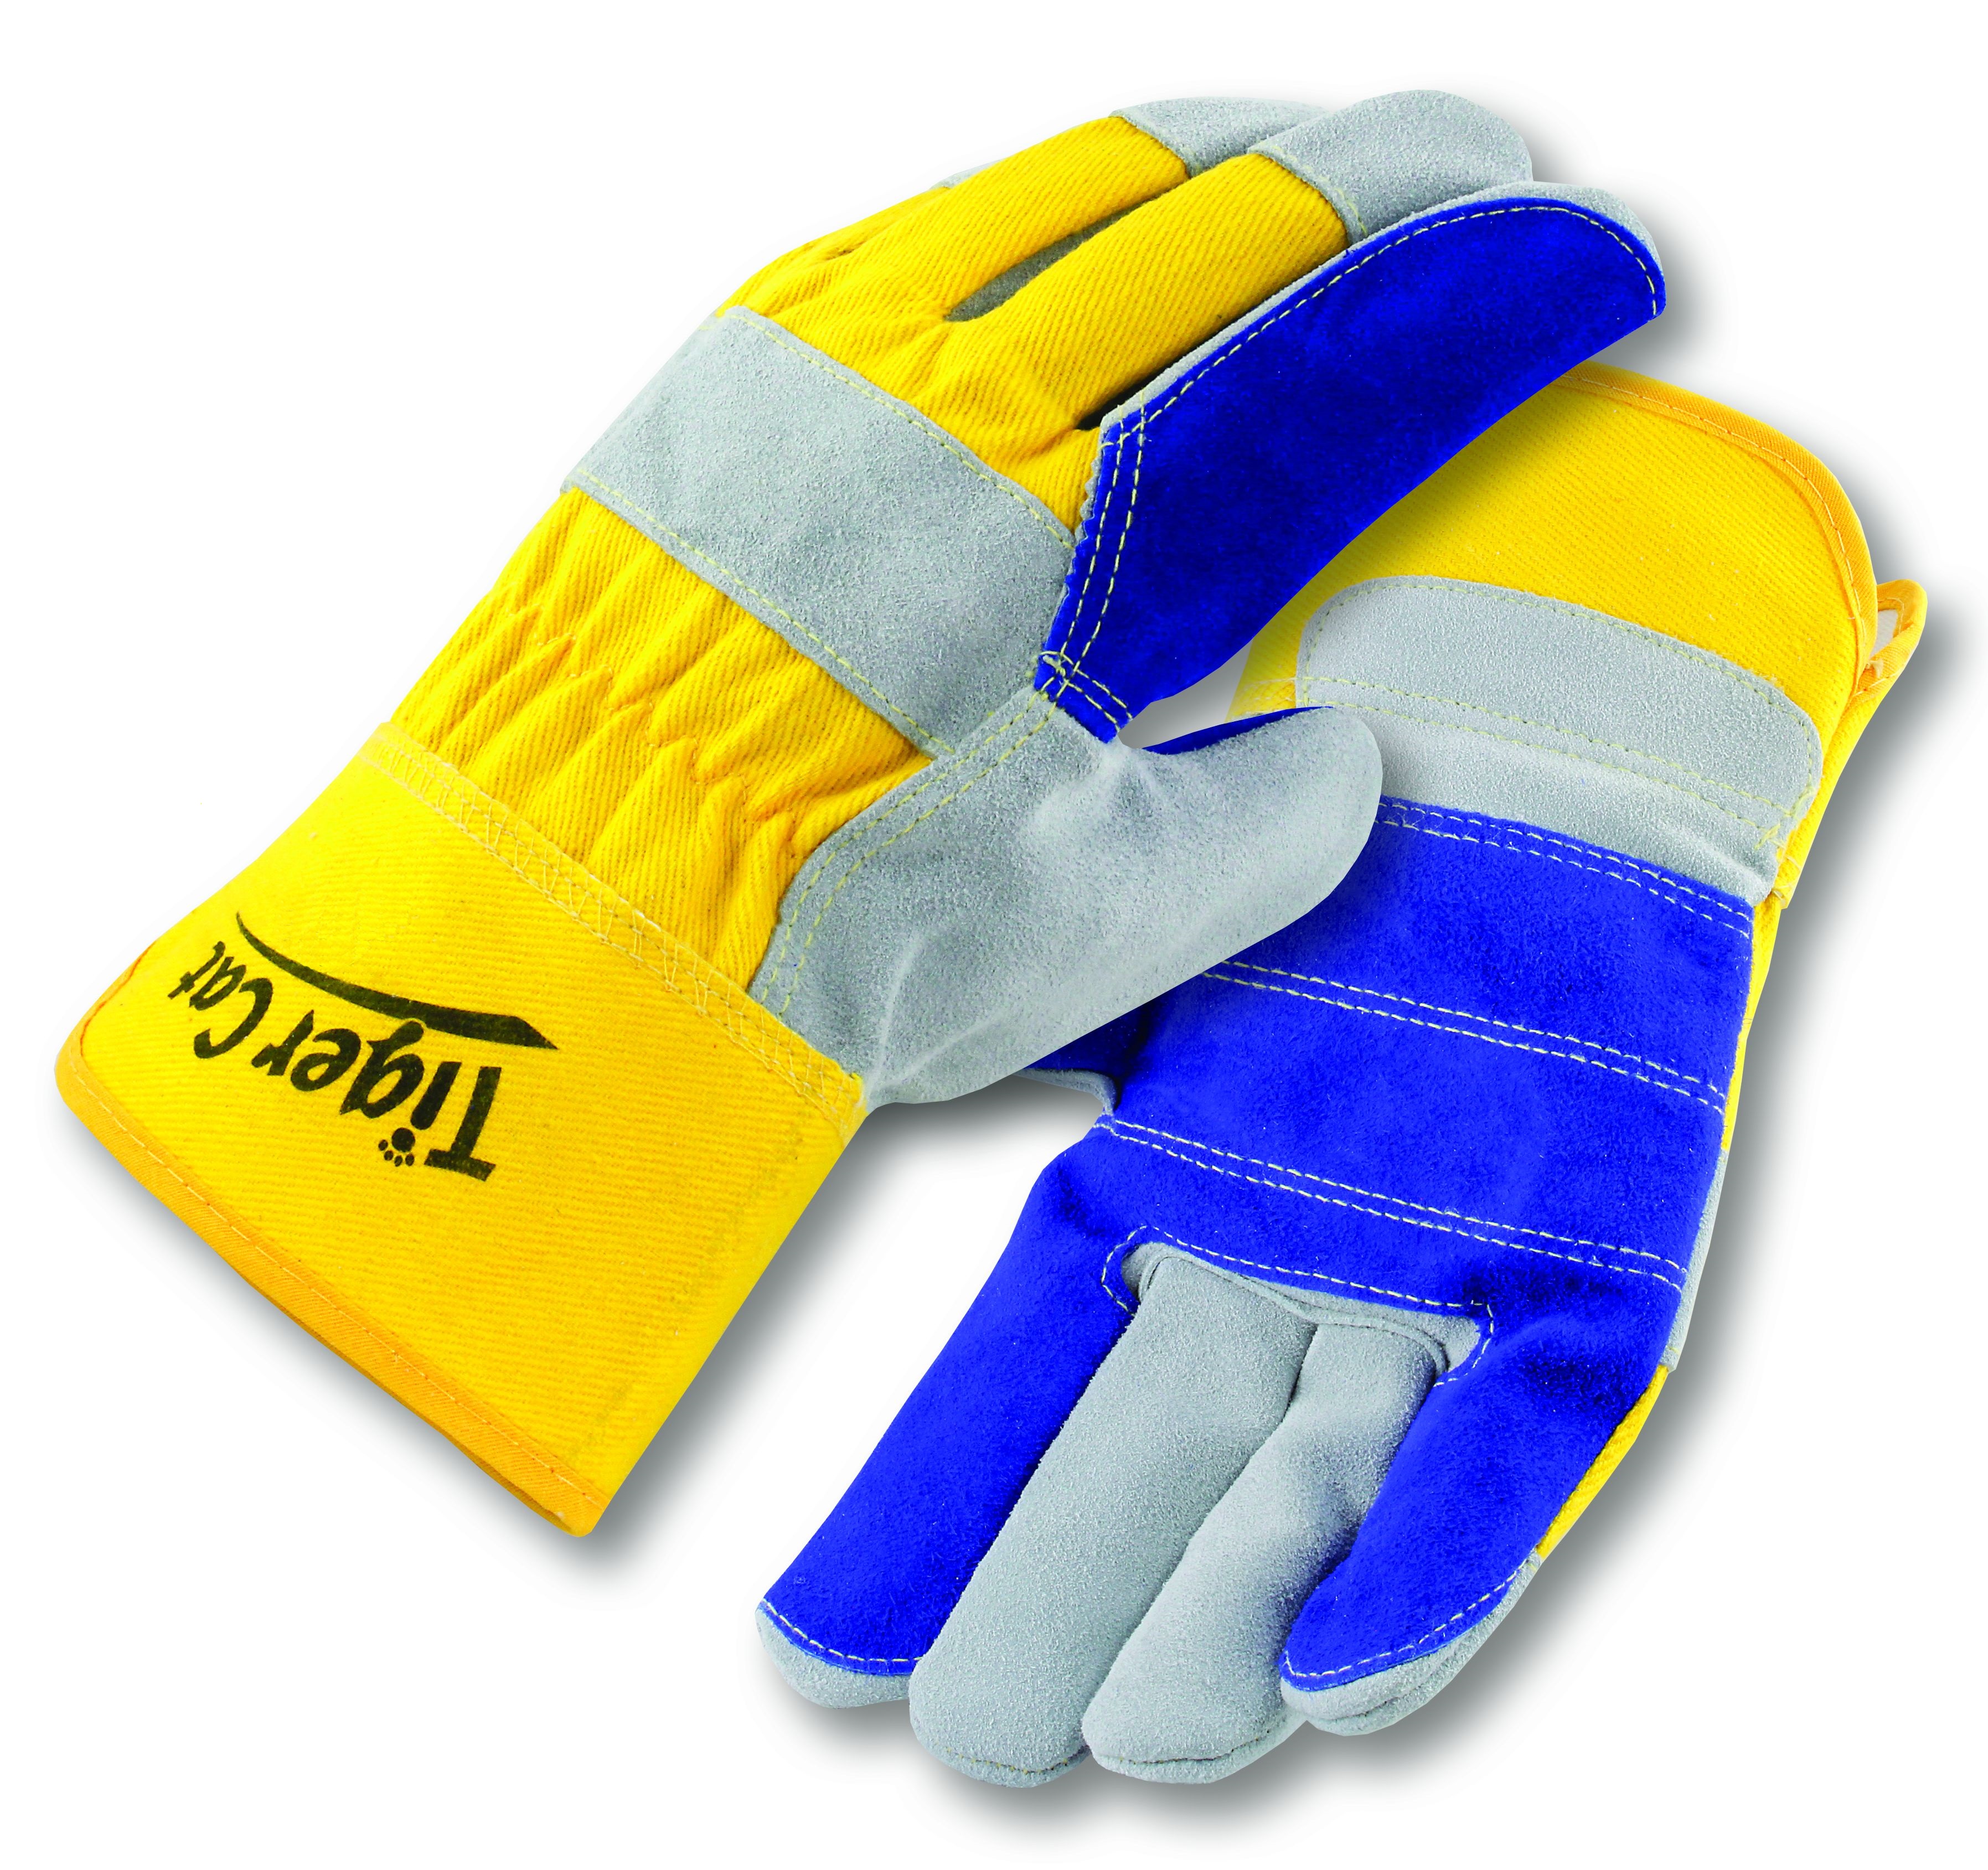 Tiger Cat&trade; Premium Leather Double Palm Gloves w/ Safety Cuff, Sewn w/ Cut Resistant Thread